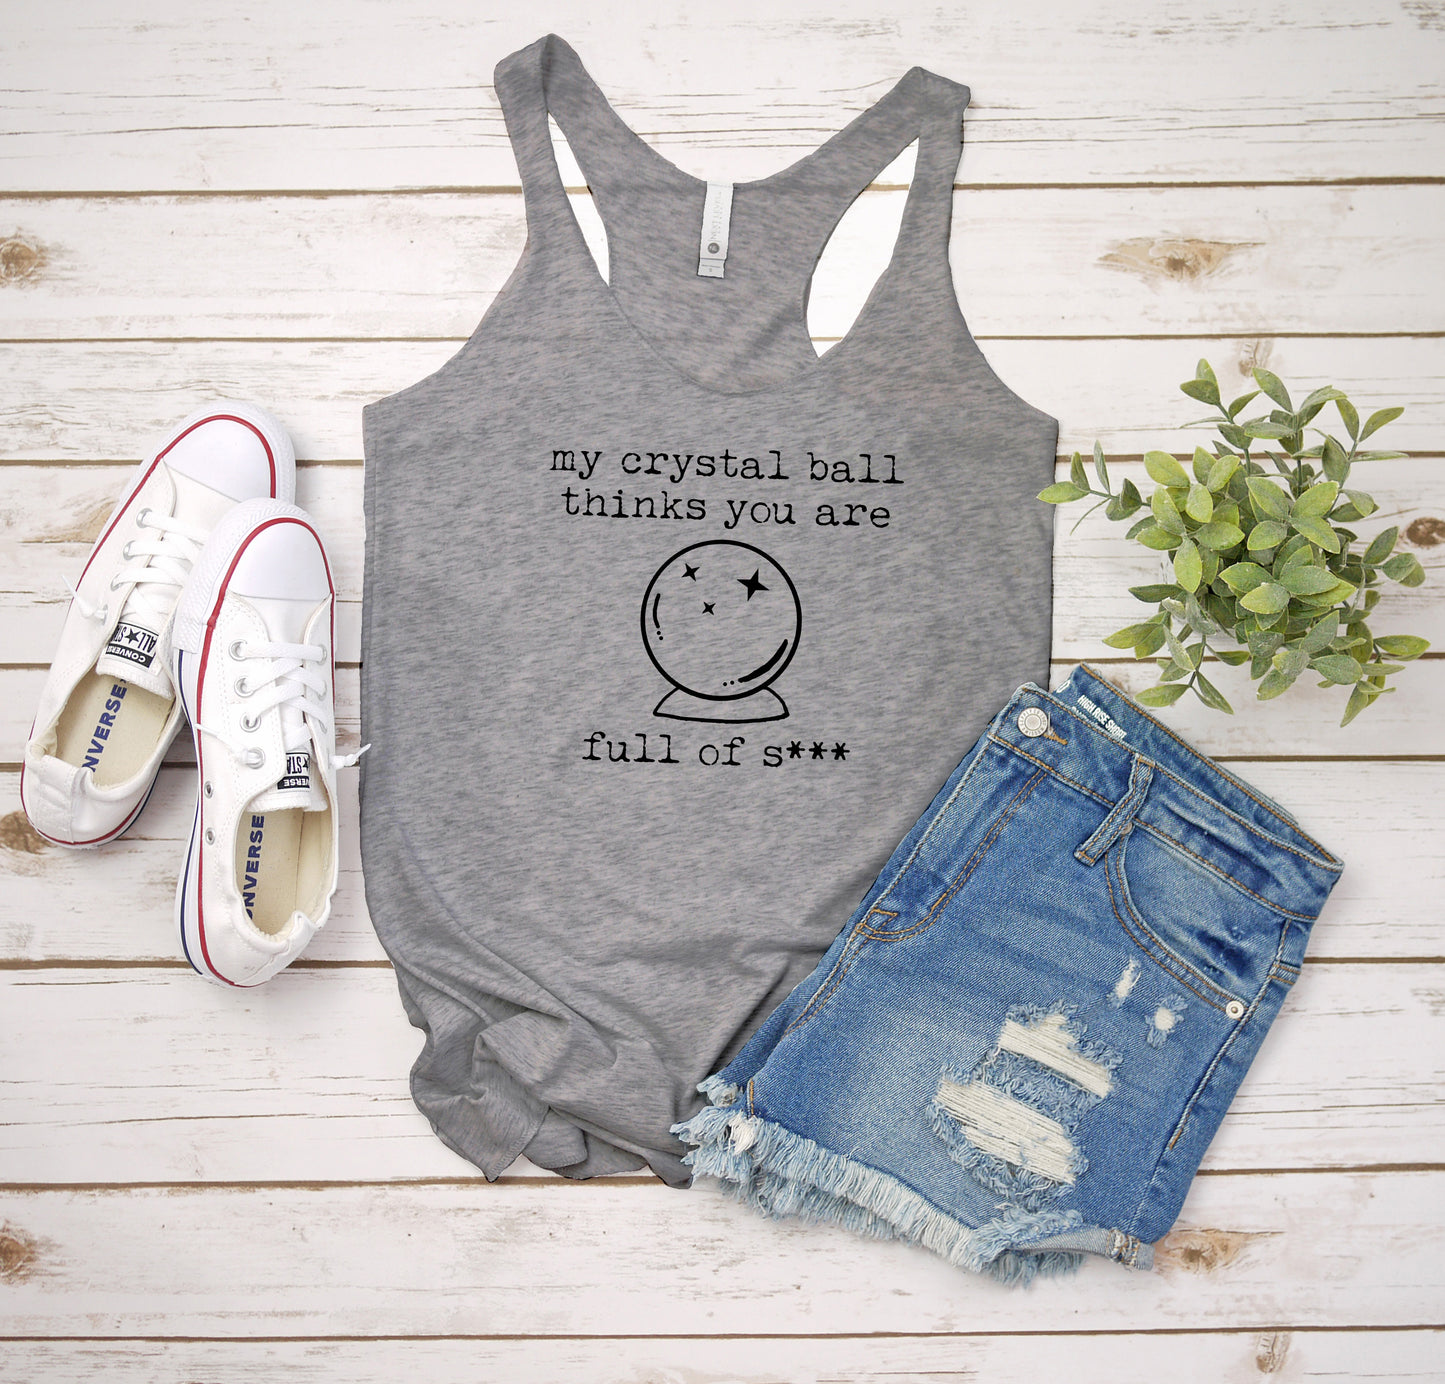 My Crystal Ball Thinks You Are... Full Of S*** - Women's Tank - Heather Gray, Tahiti, or Envy